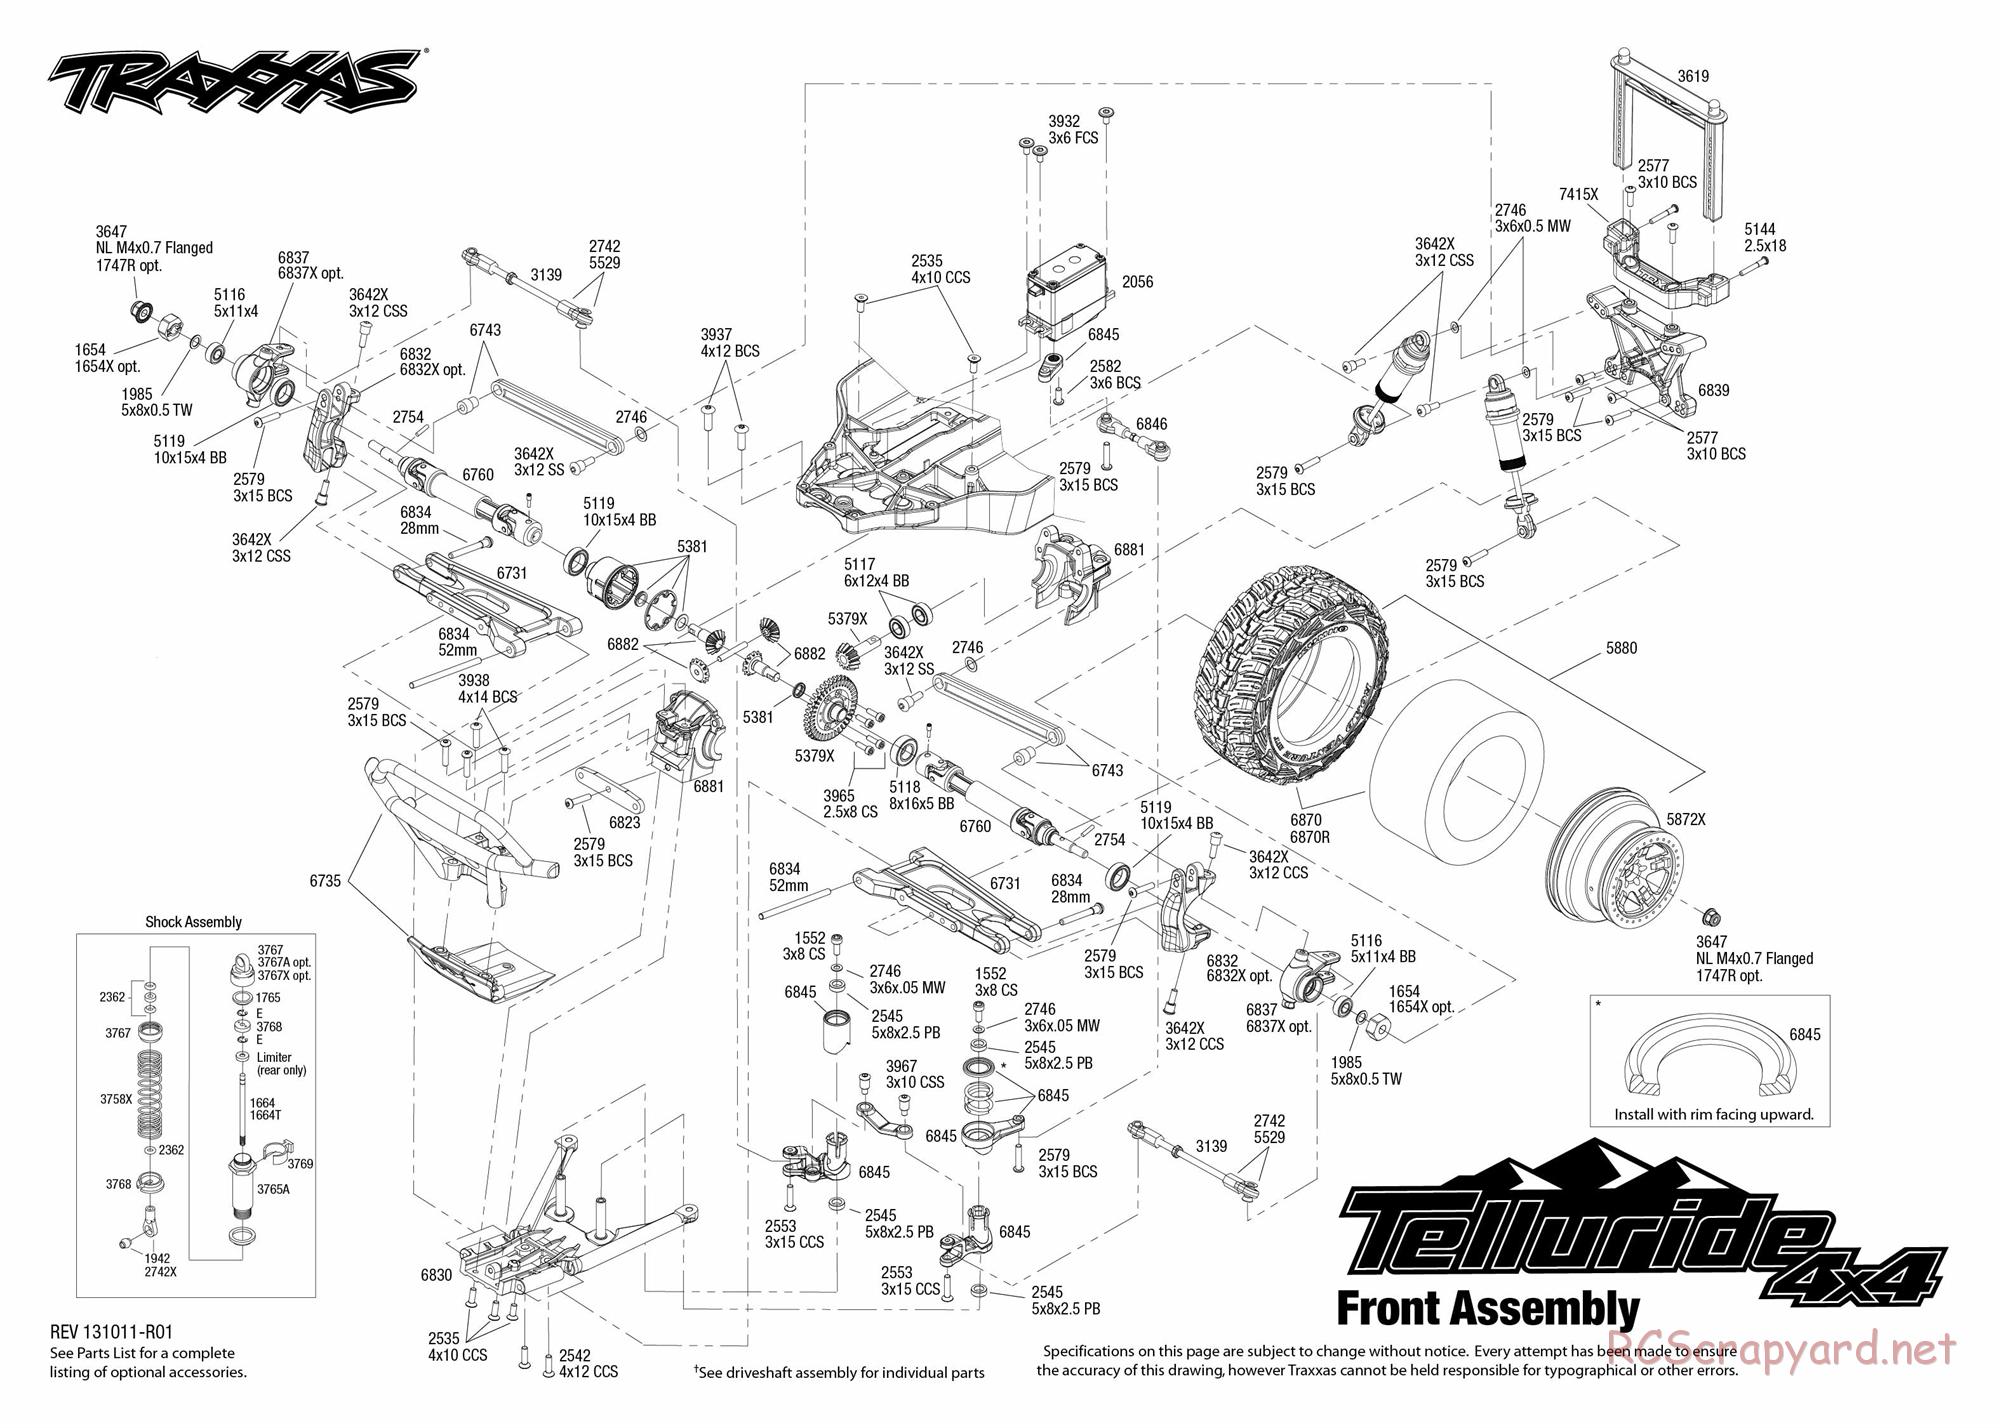 Traxxas - Telluride 4x4 (2013) - Exploded Views - Page 3